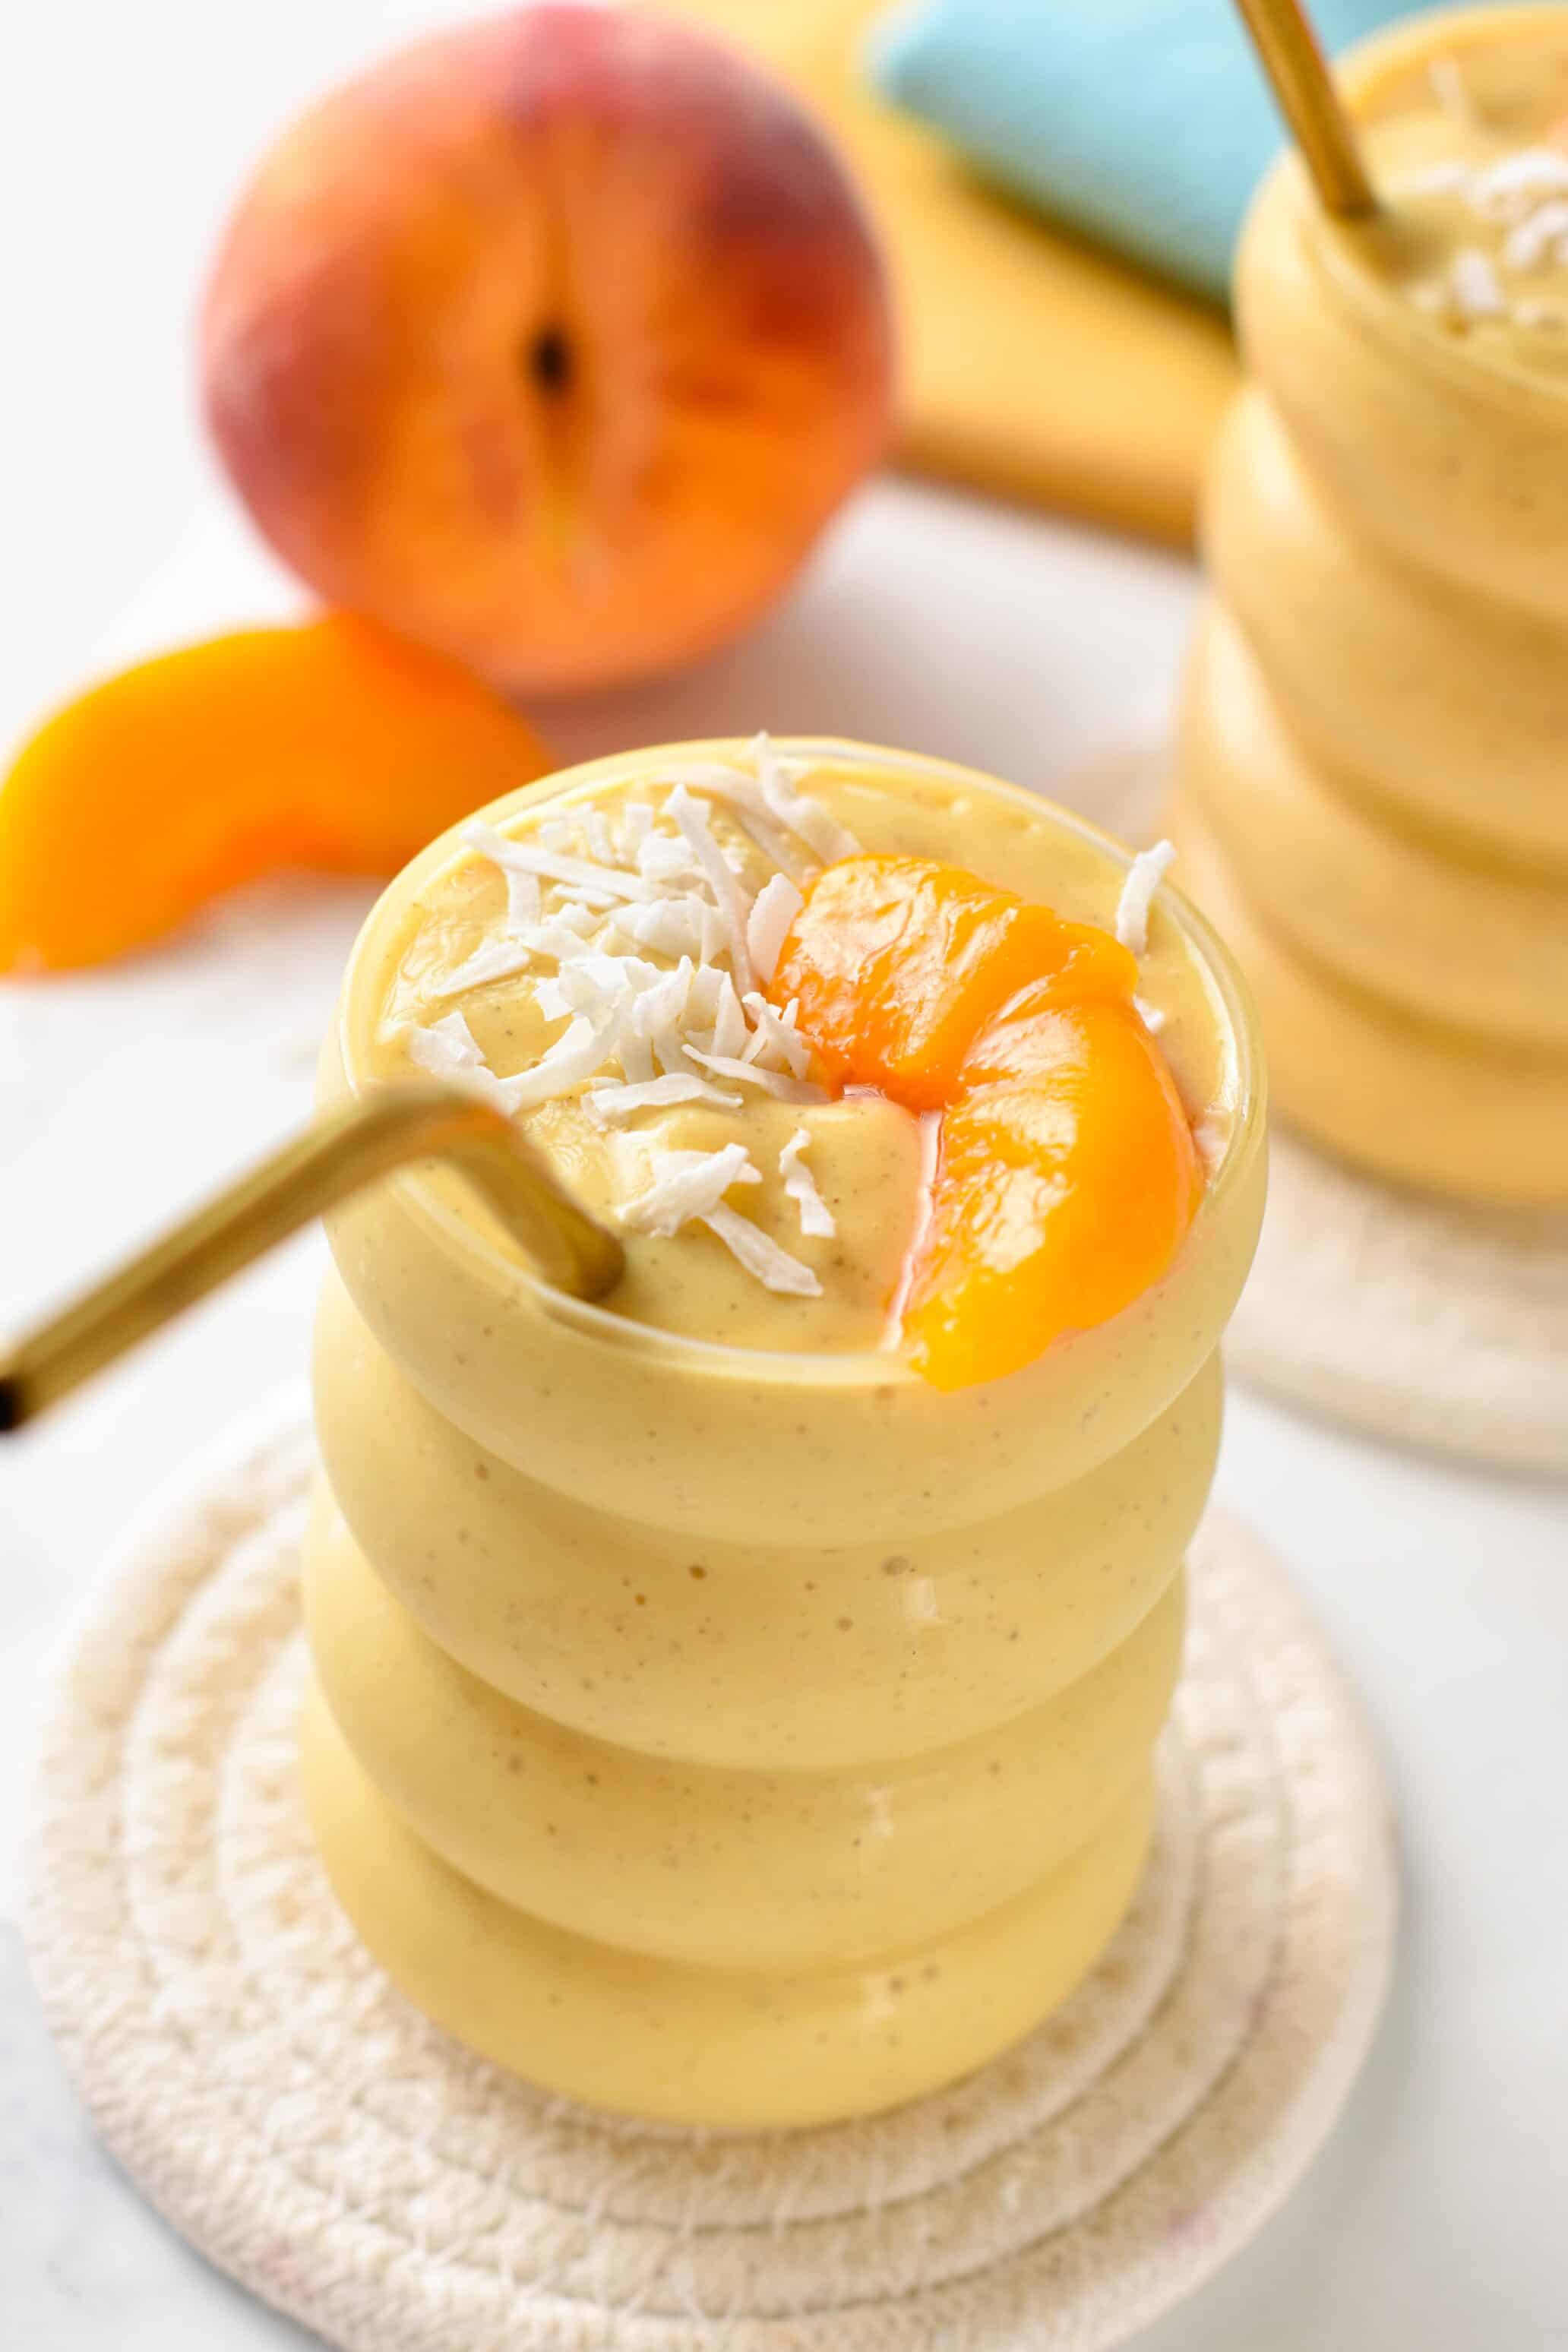 This Banana Peach Smoothie is a deliciously thick and creamy smoothie for summer packed with peach flavors.